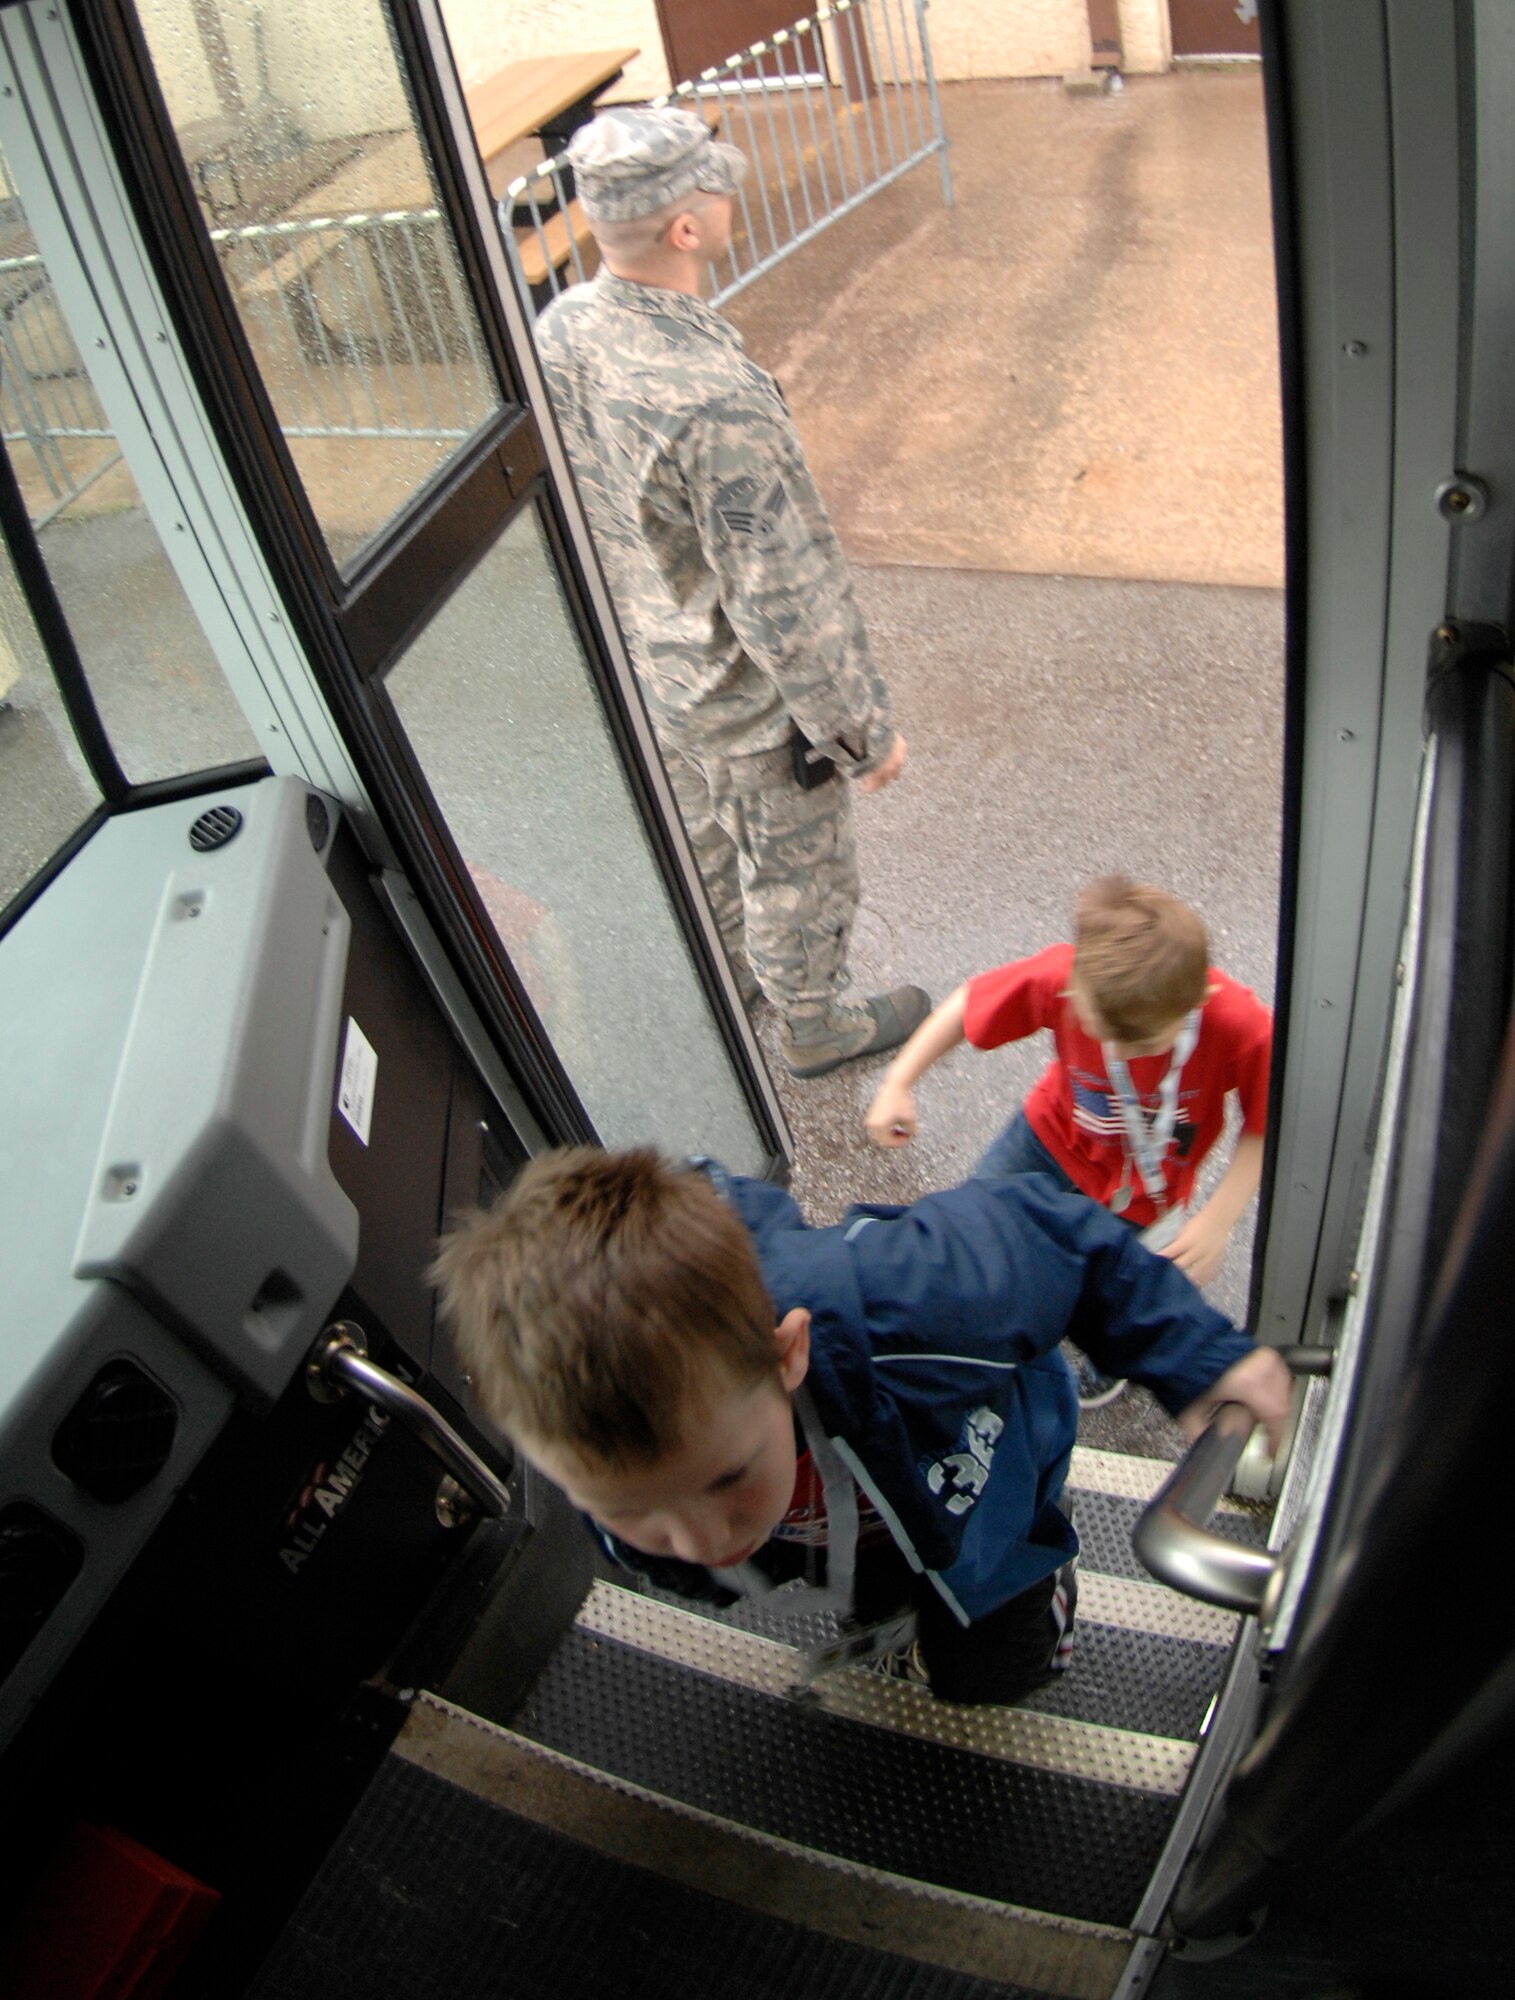 WHITEMAN AIR FORCE BASE, Mo. - Young "Airmen" load onto a bus April 18 during Operation Spirit as they prepare to go to the flightline and board an awaiting C-130. The "Airmen" participated in a mock deployment to Kabul, Afghanistan. Operation Spirit is a simulated deployment line for school-aged kids that allows children to experience what their military parents go through during a deployment. The "Airmen" were accompanied by their parents and received goodies form several base agencies. (U.S. Air Force photo/Staff Sgt. Jason Barebo)